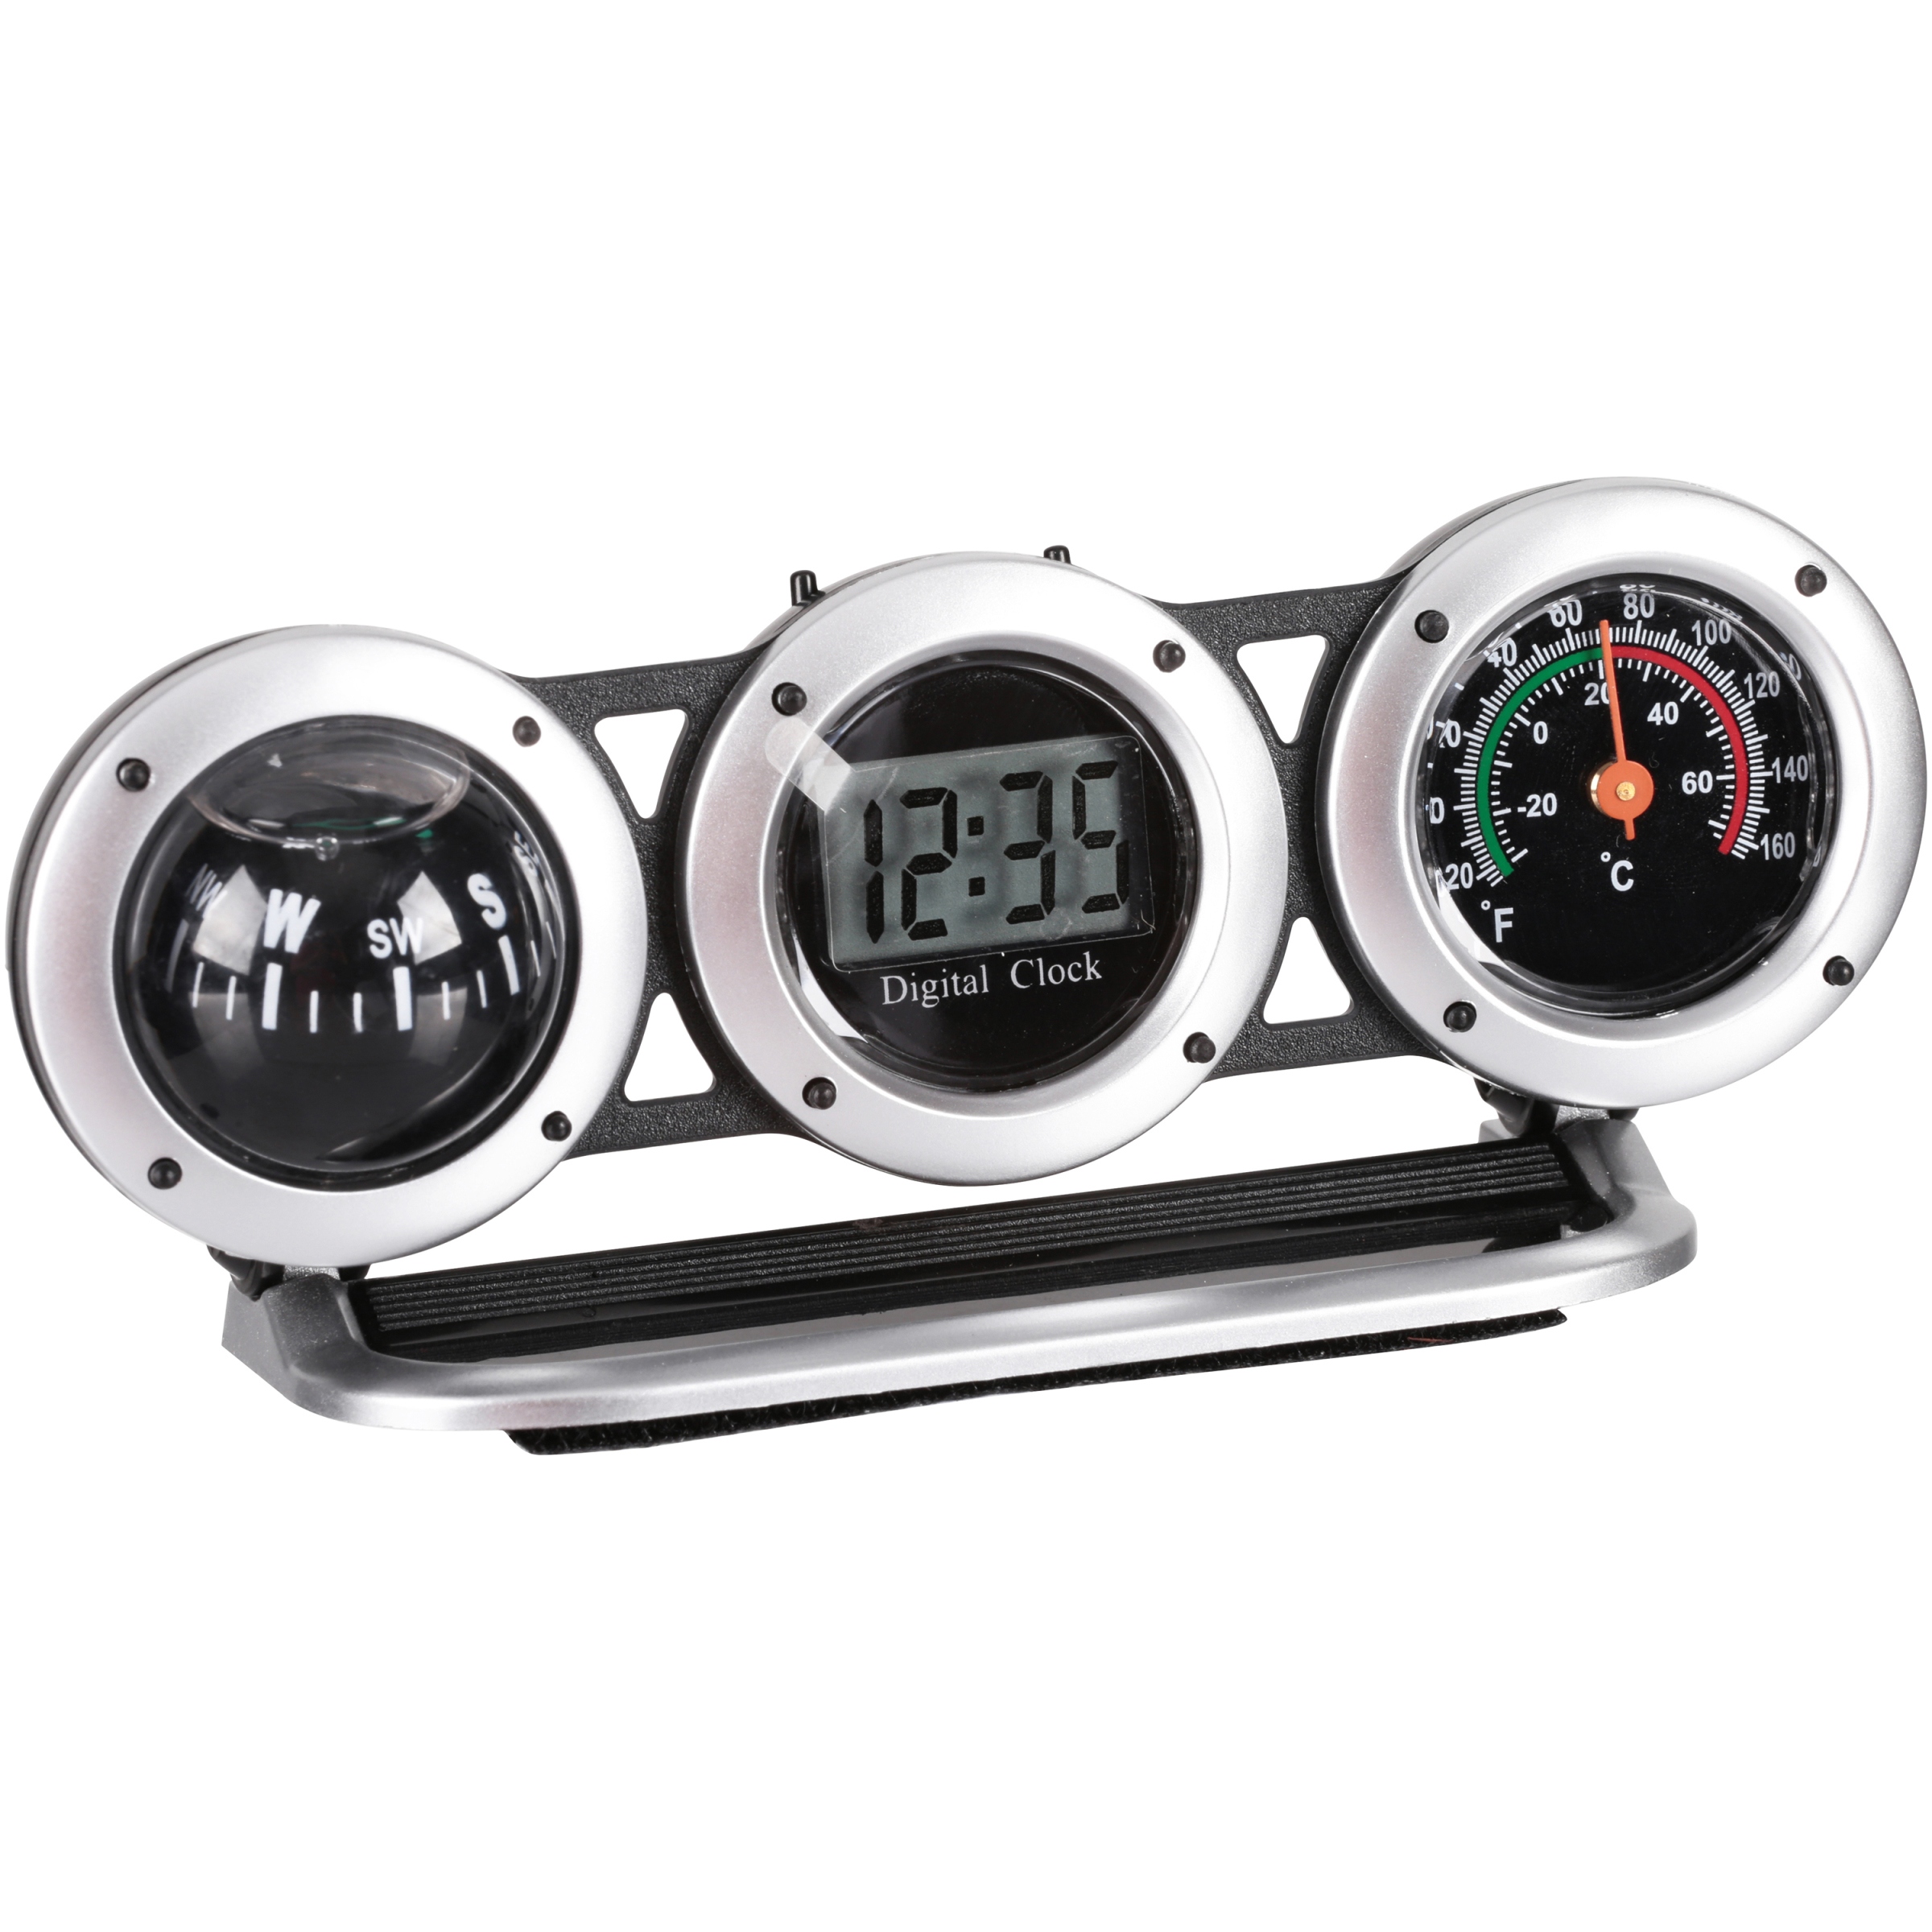 Bell® Clock Compass Thermometer - image 1 of 10